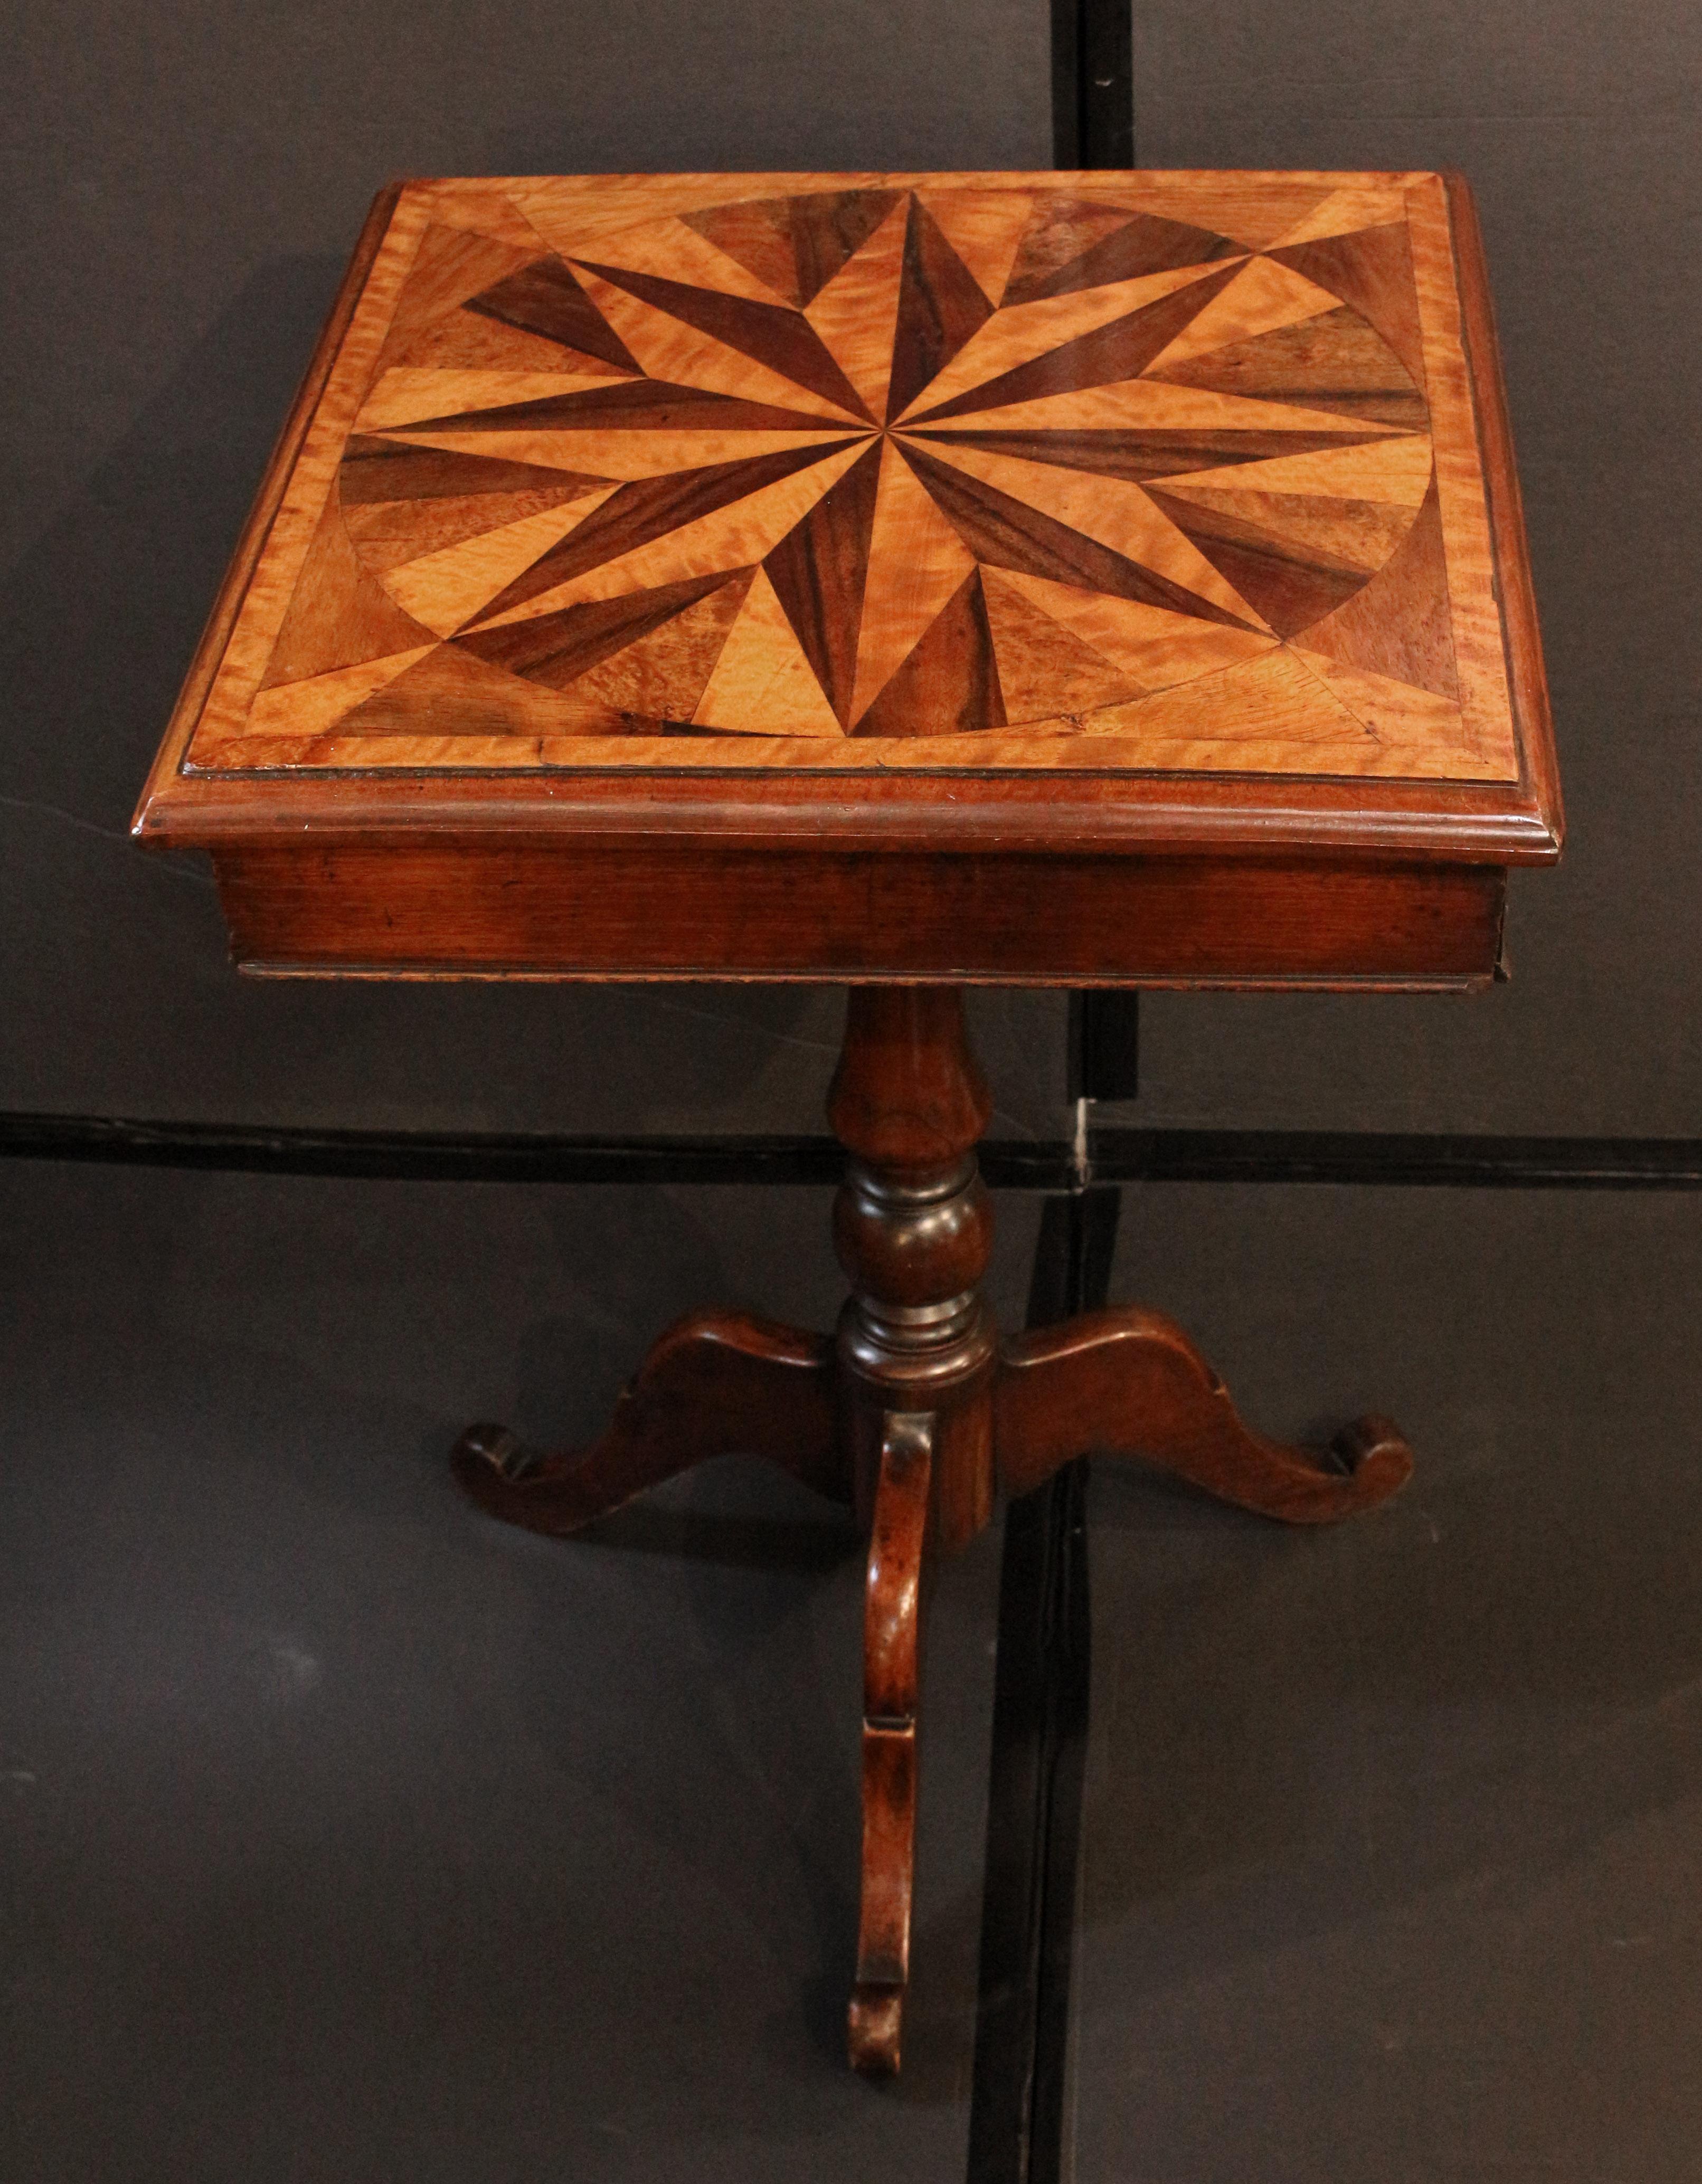 Circa 1860 star inlaid top side table with drawer, English. Specimen wood inlaid top. Hidden apron drawer. Mahogany with oak secondary. Turned pedestal base with 3 outswept, shaped legs.
19 1/4